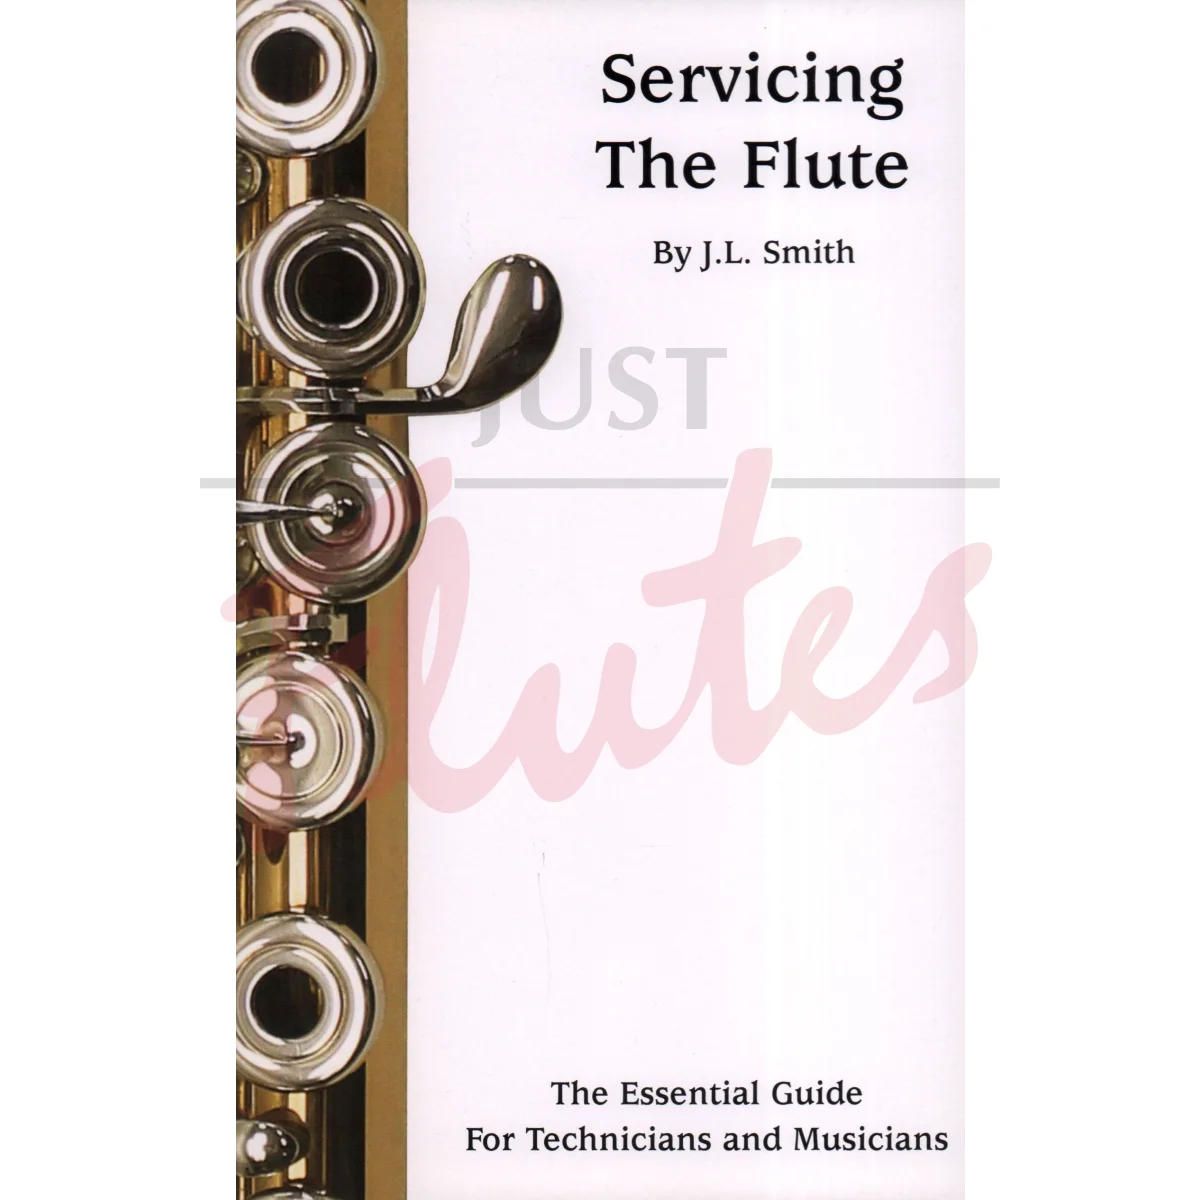 Servicing the Flute